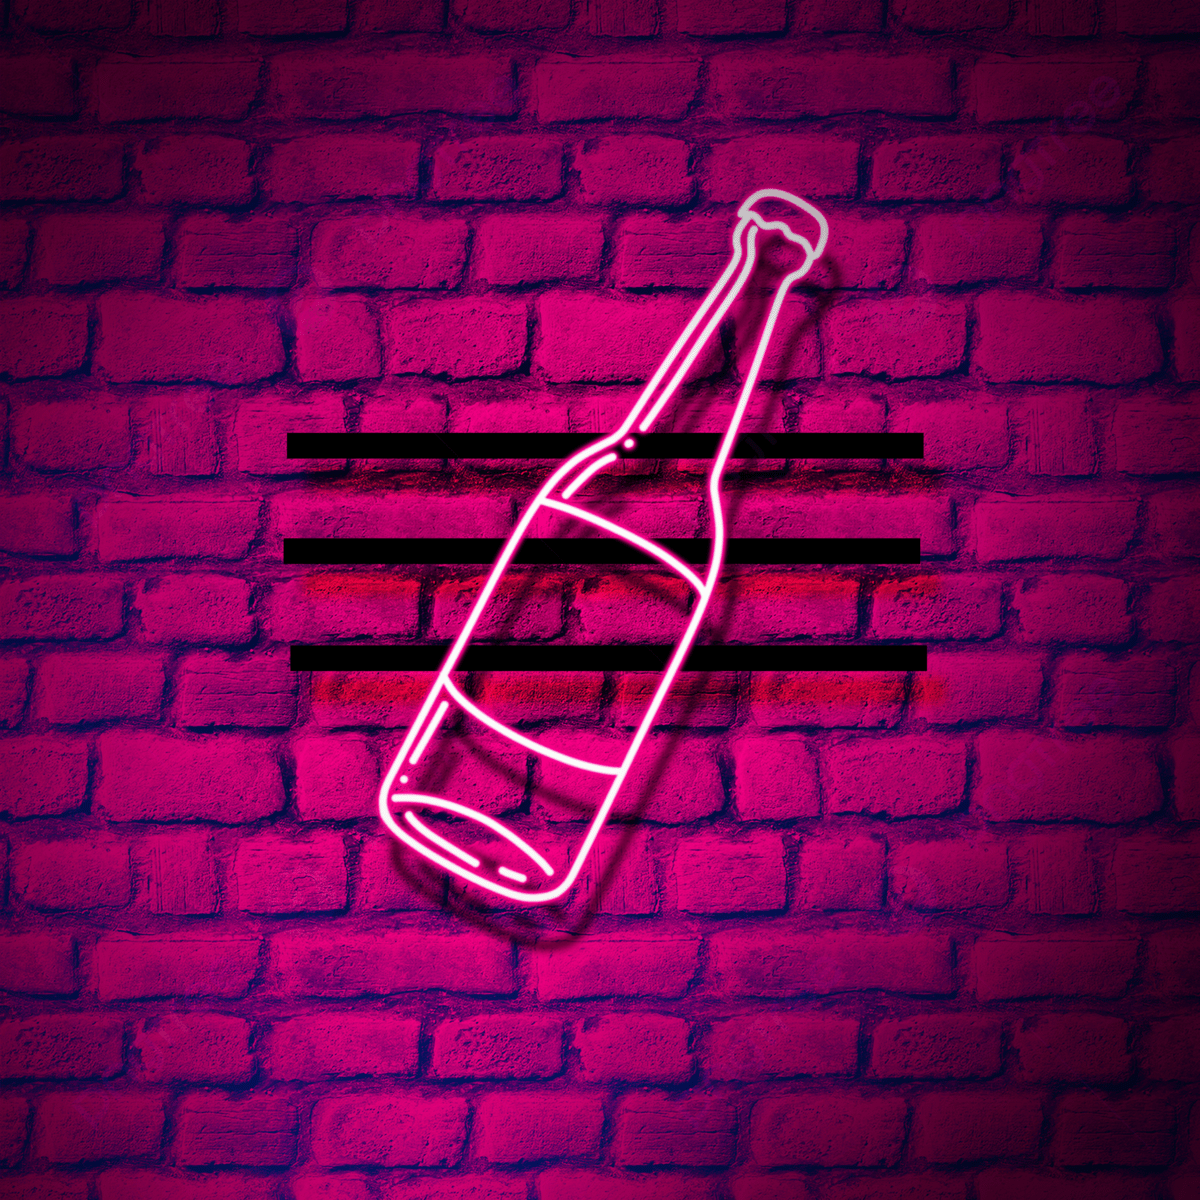 A bottle of wine on the brick wall neon sign - Neon pink